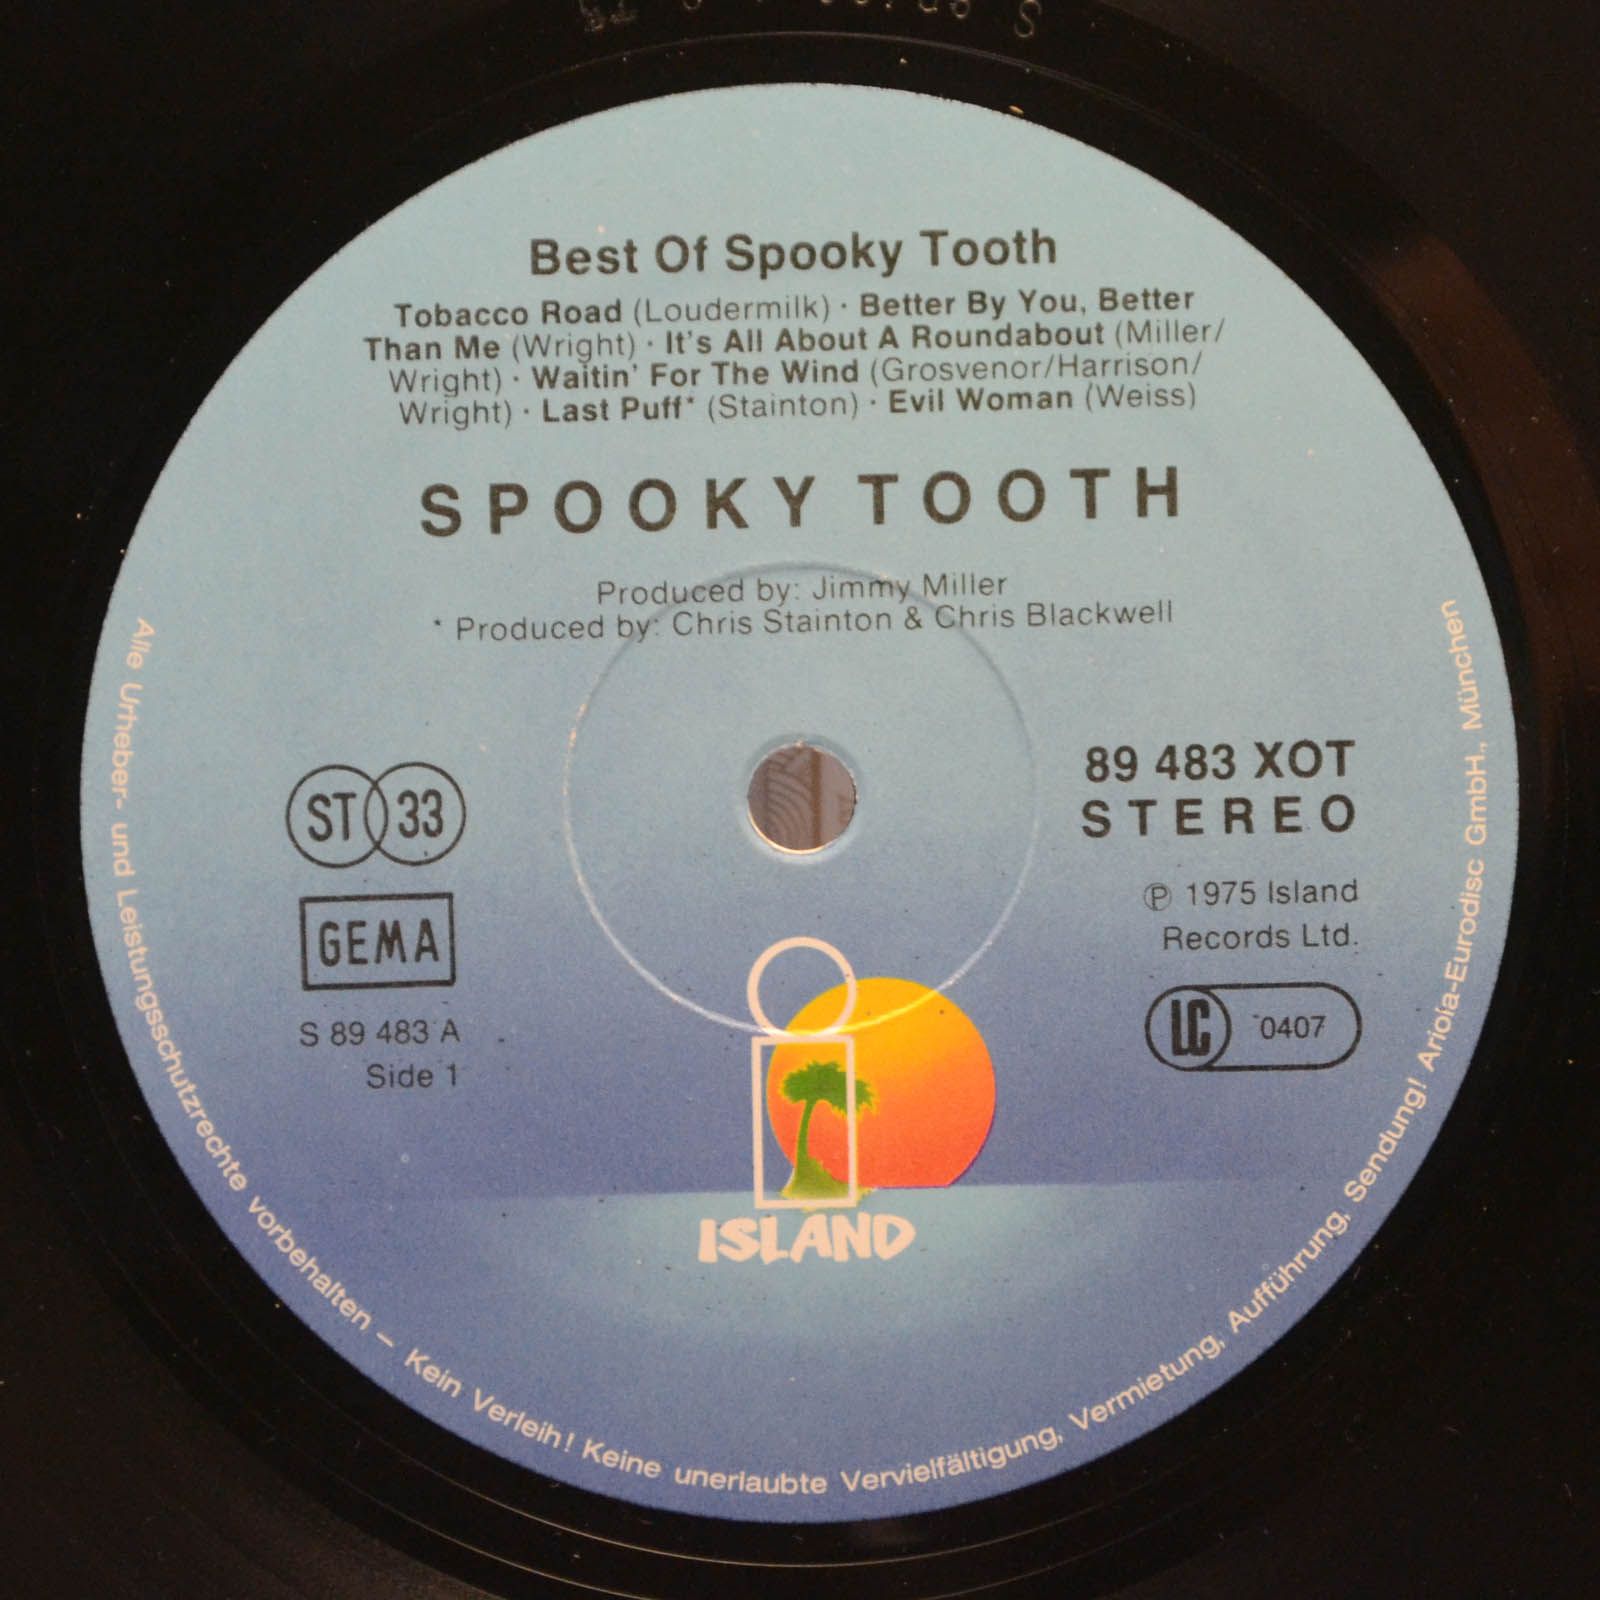 Spooky Tooth — The Best Of Spooky Tooth, 1976